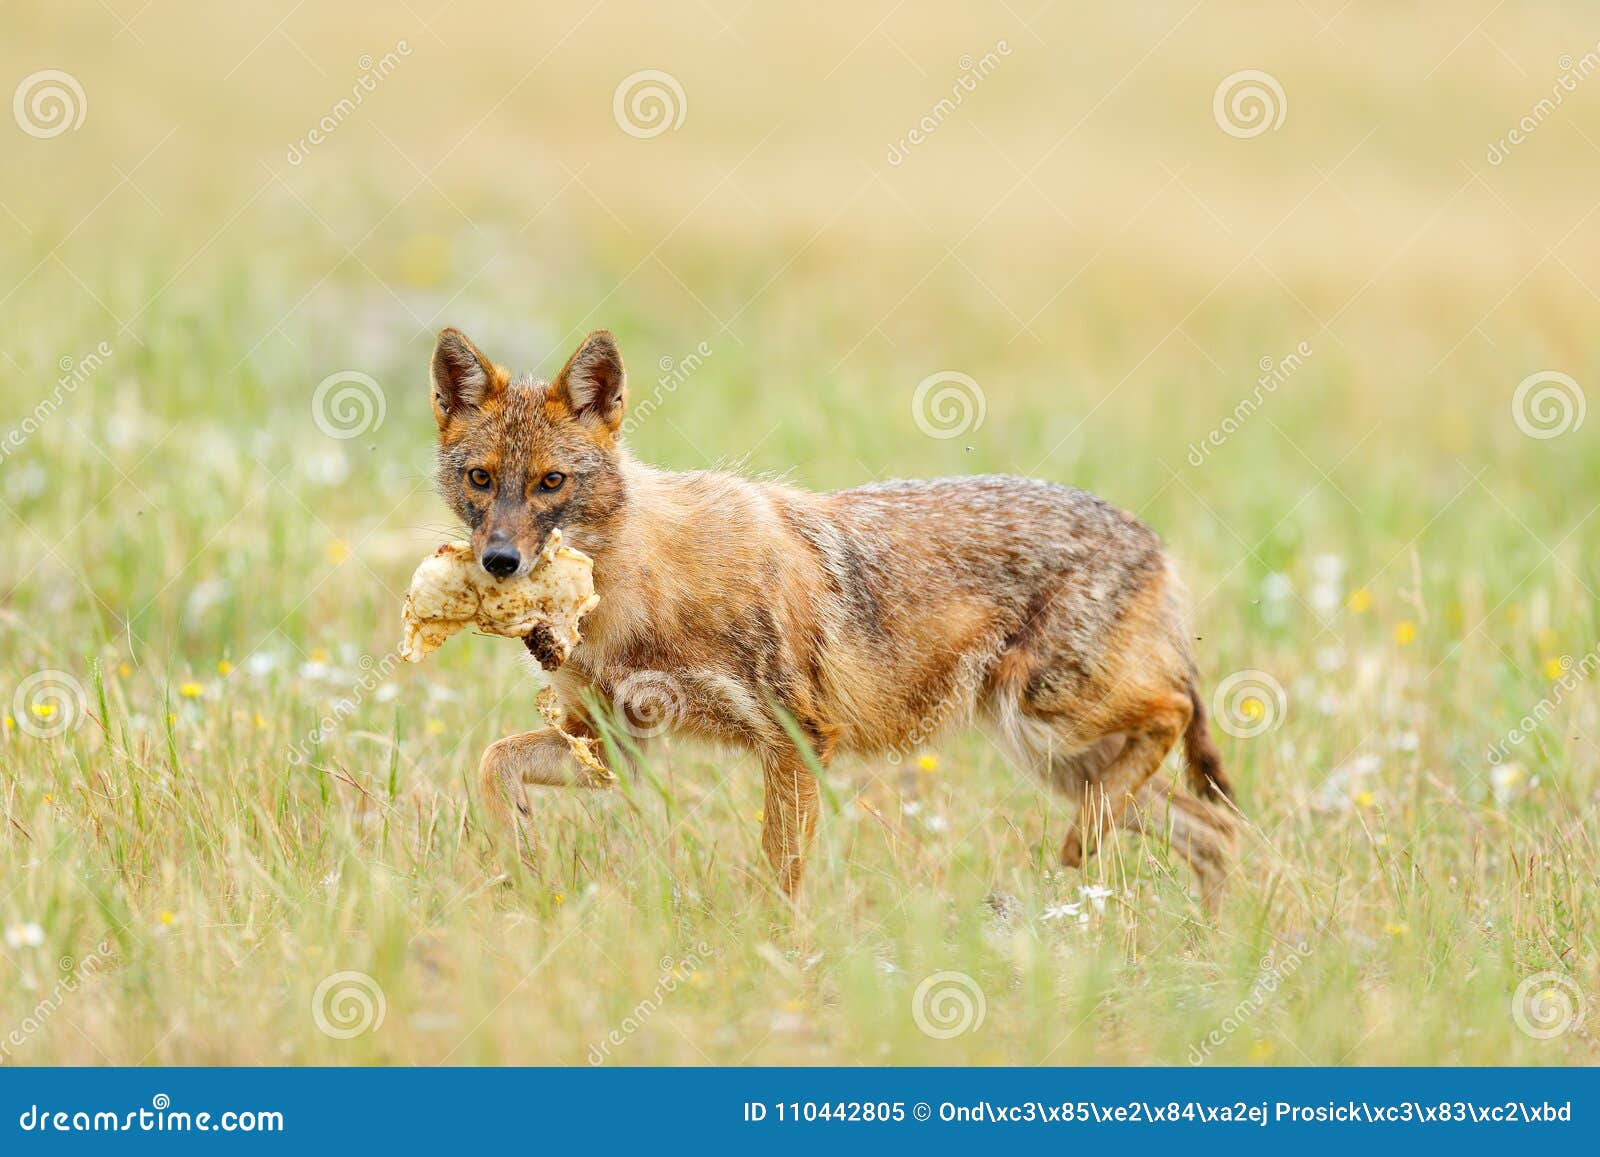 are jackals related to dogs